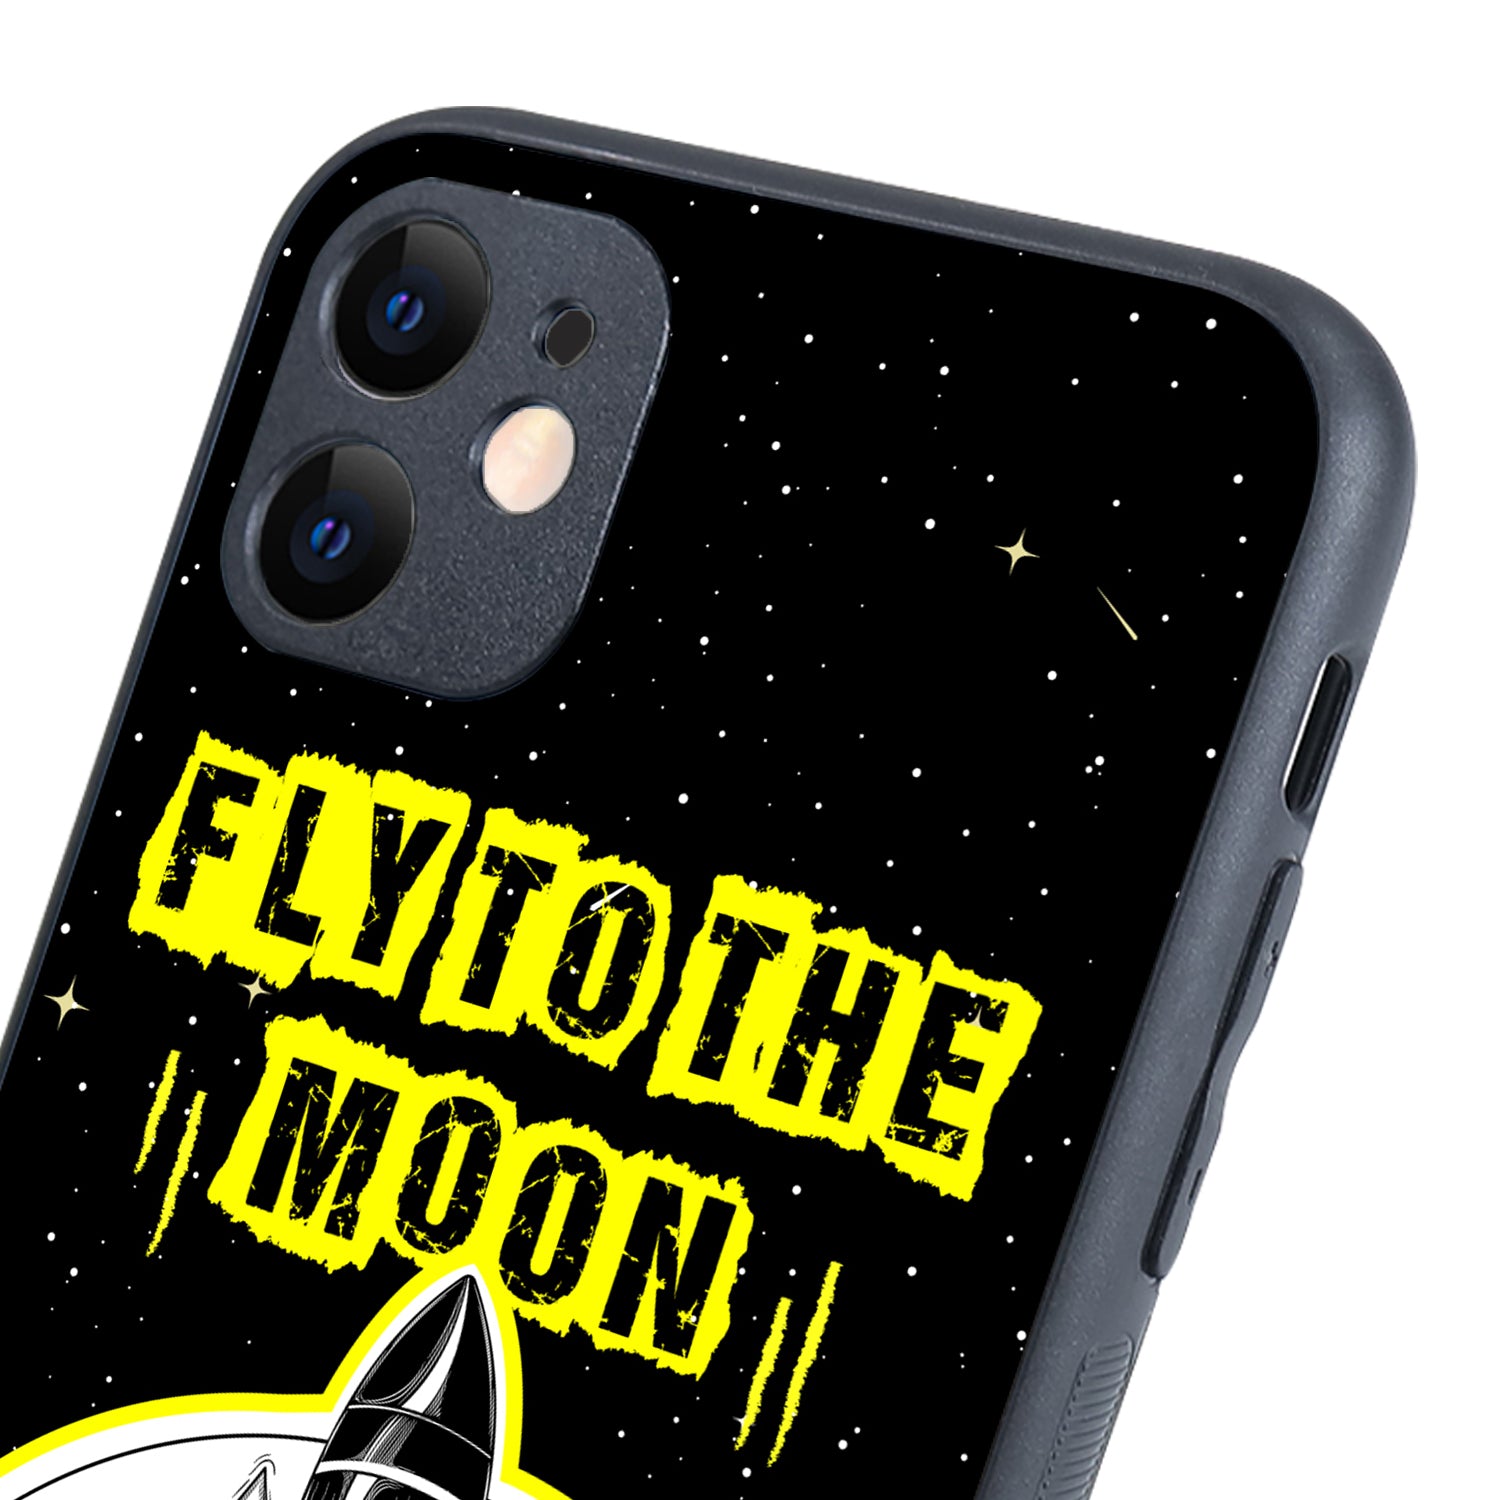 Fly To The Moon Space iPhone 11 Case